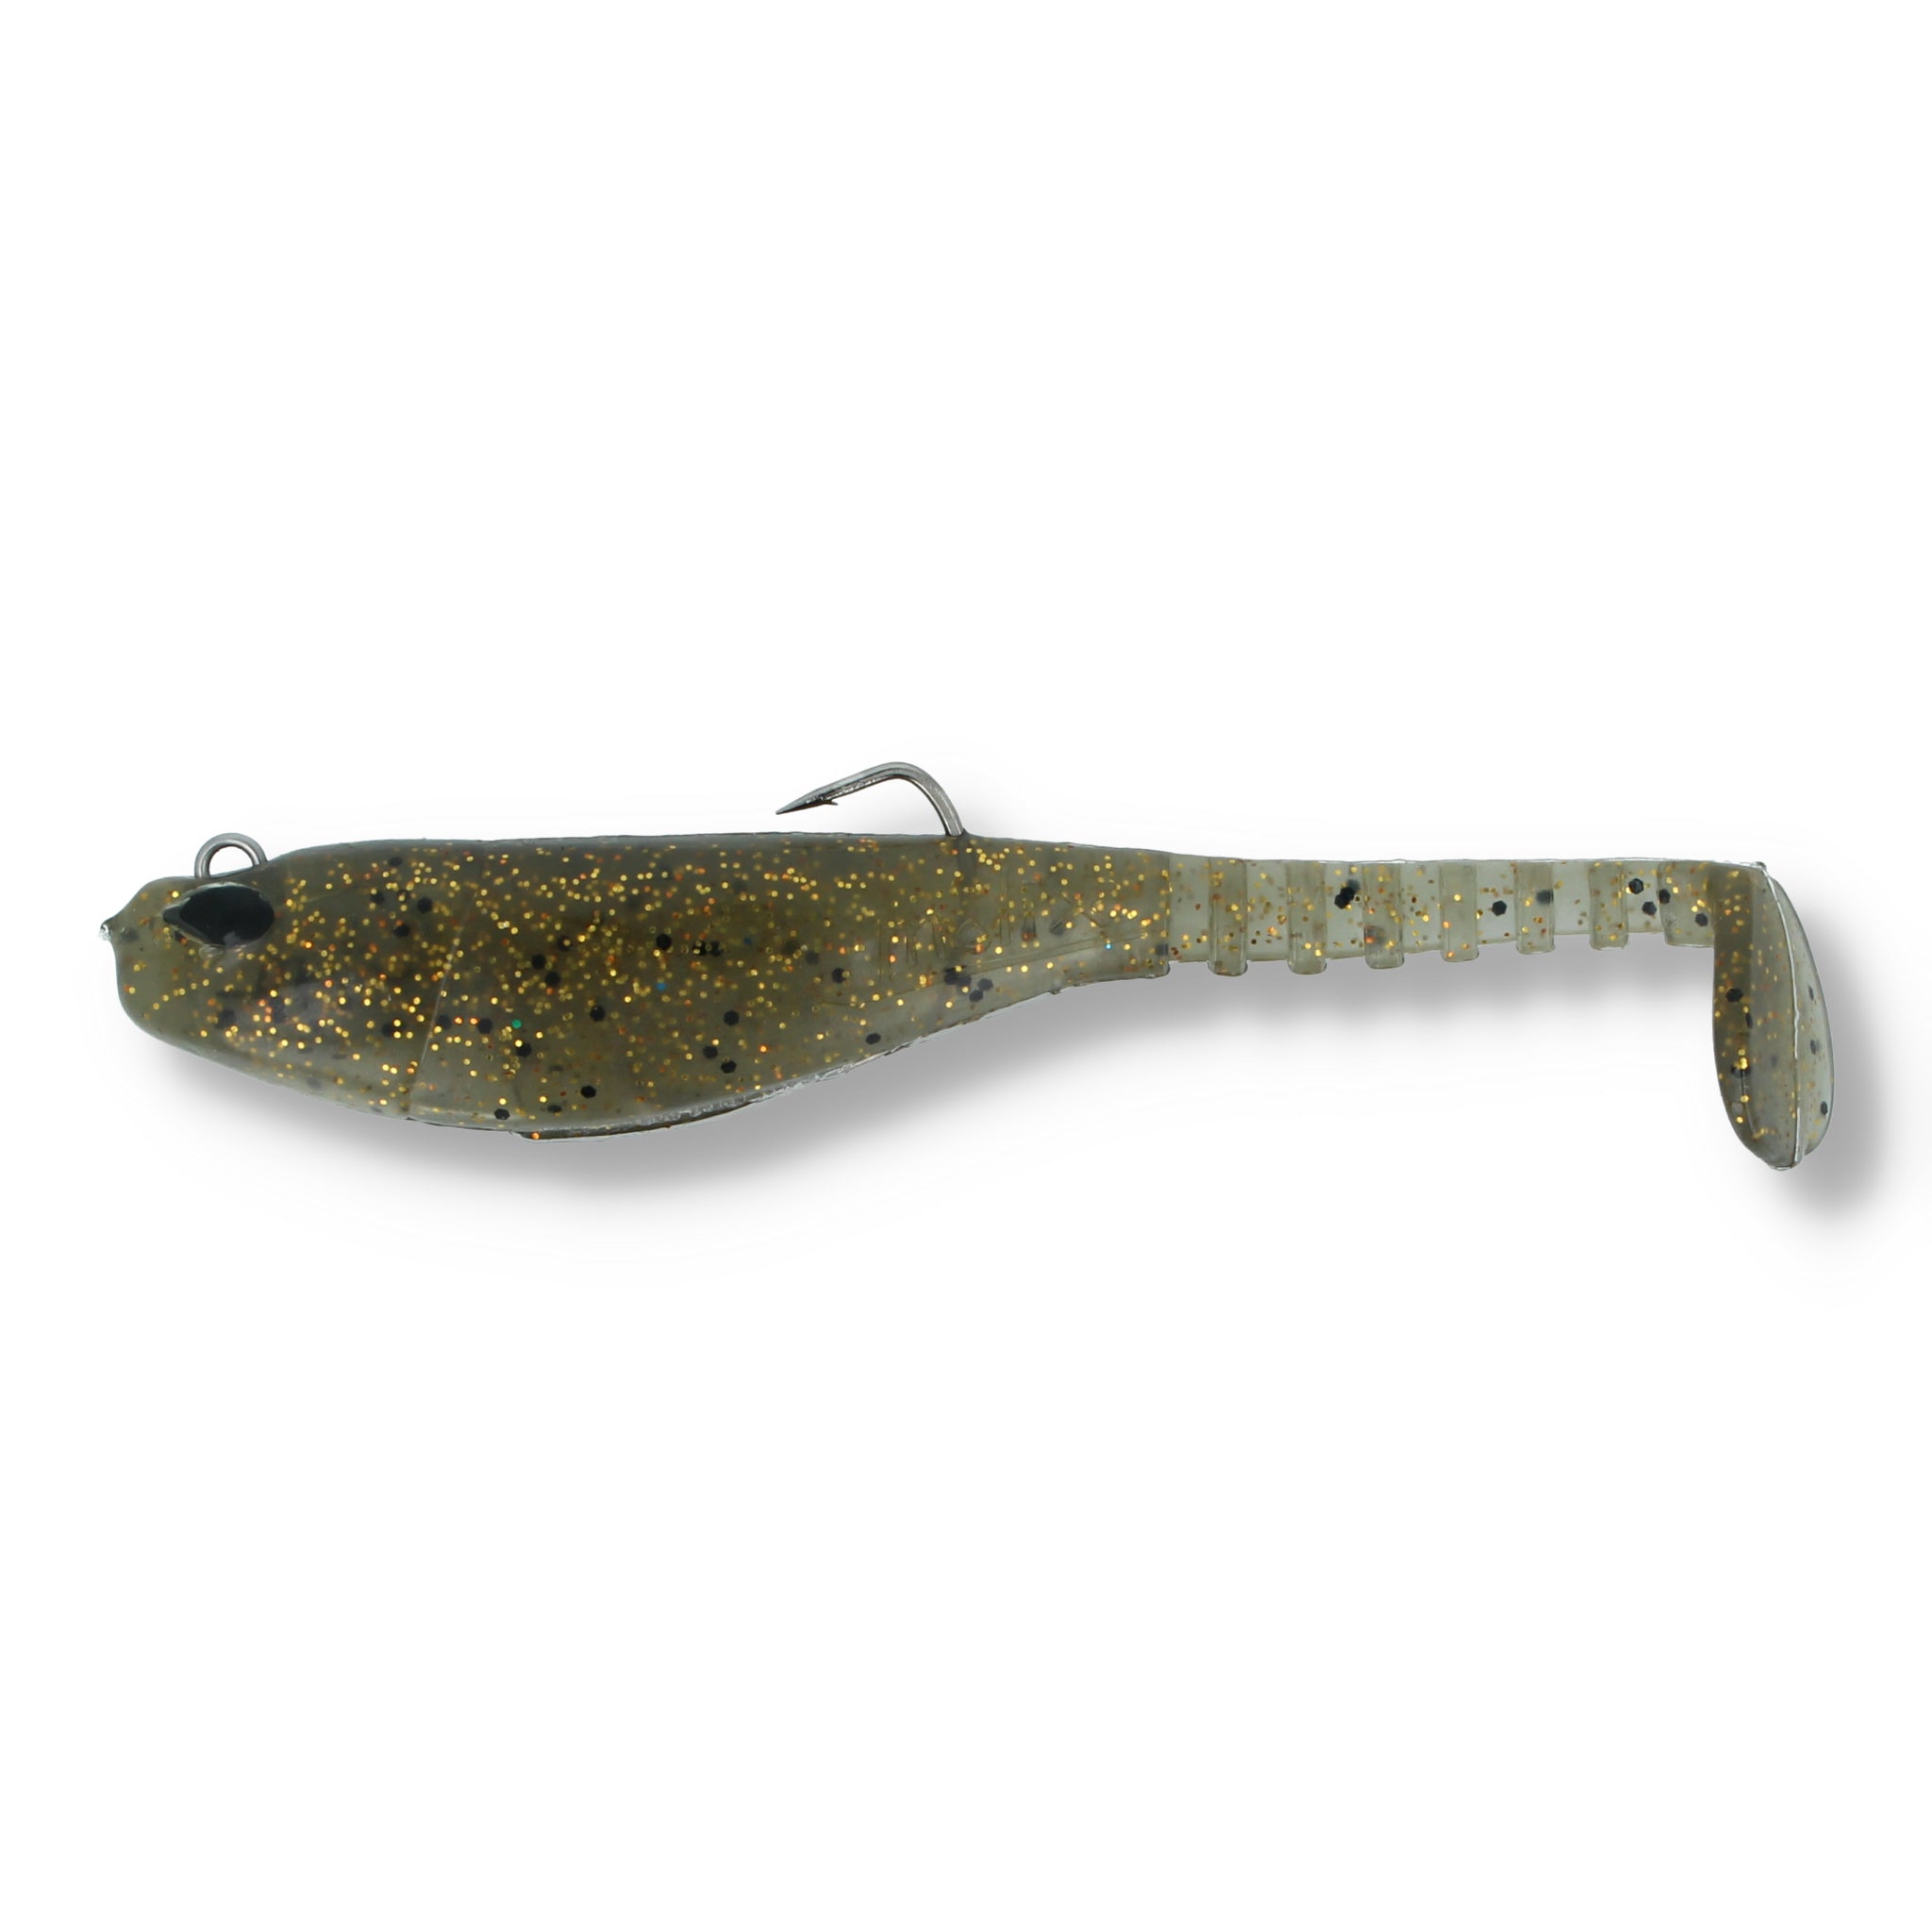 Molix Special Swimming SS Shad 5"